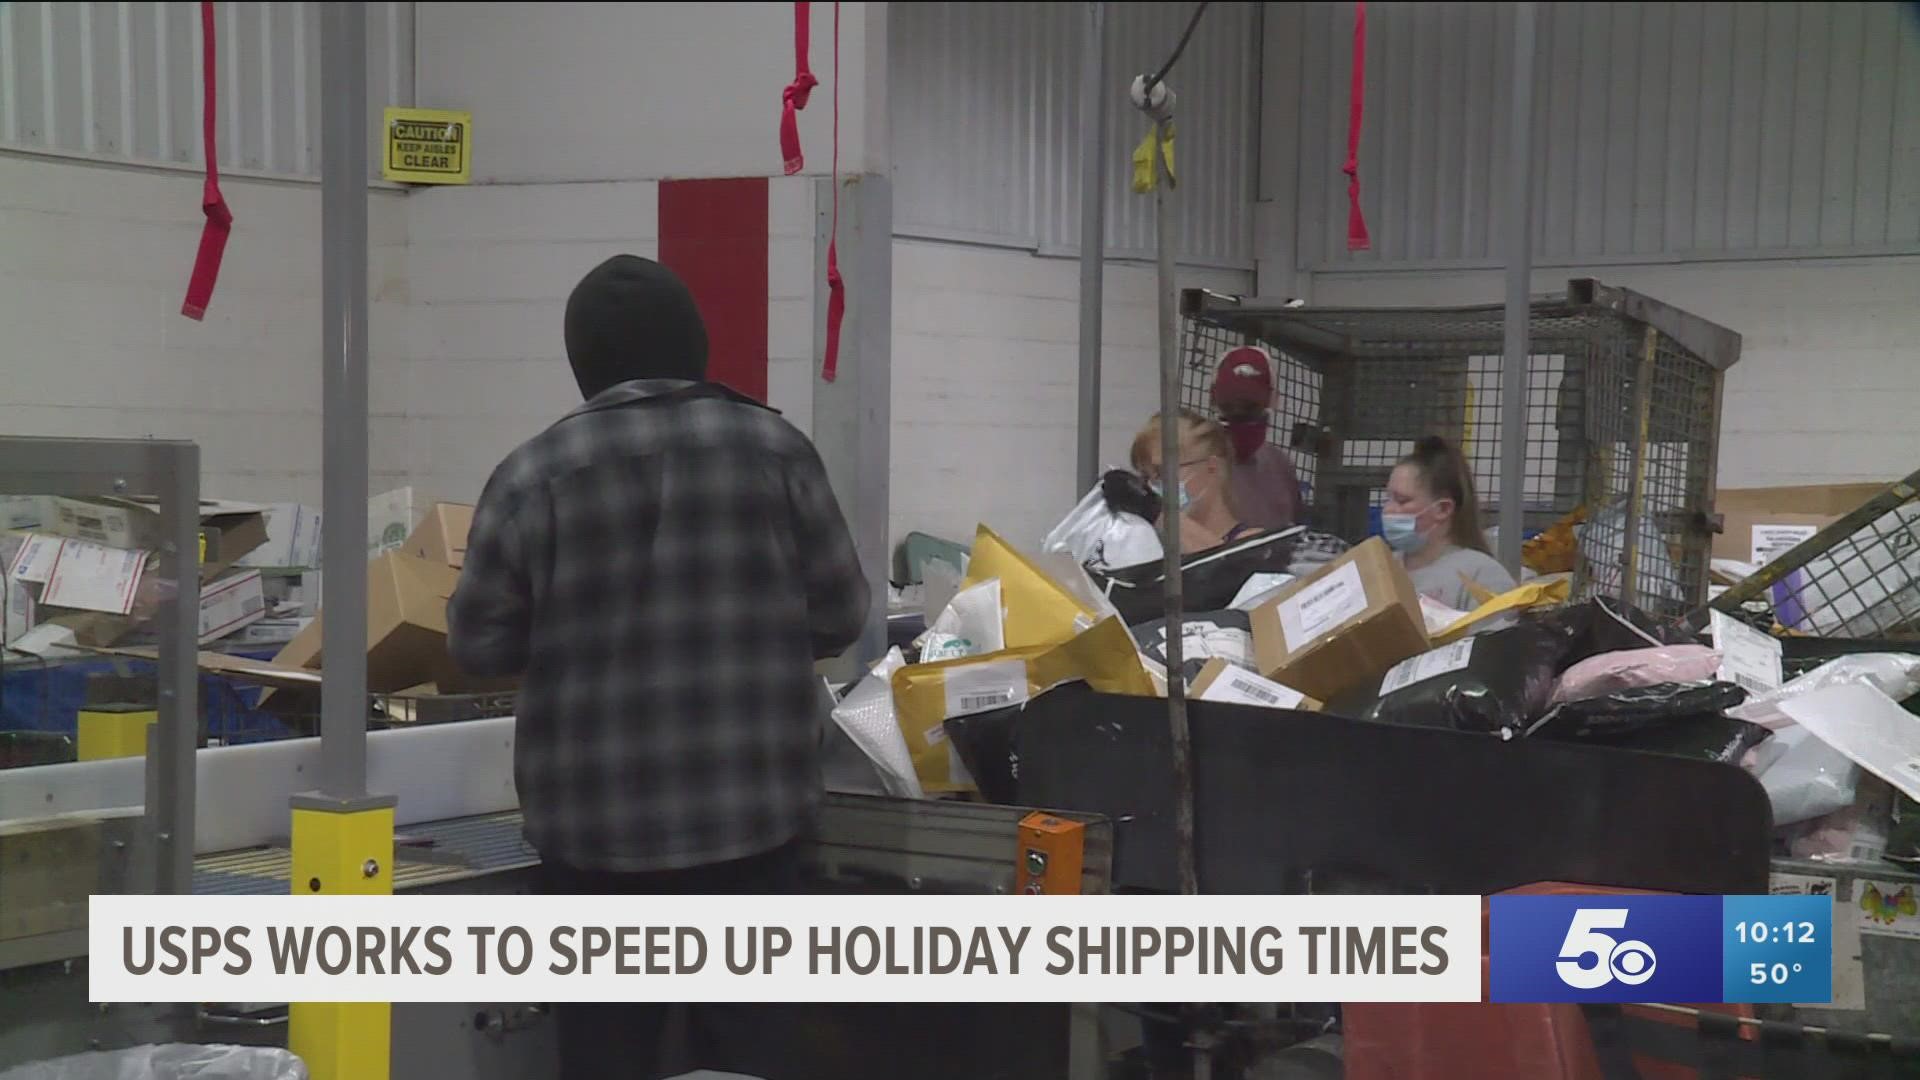 USPS is looking to expedite holiday shipping with a new machine that sorts mail faster and more accurately.